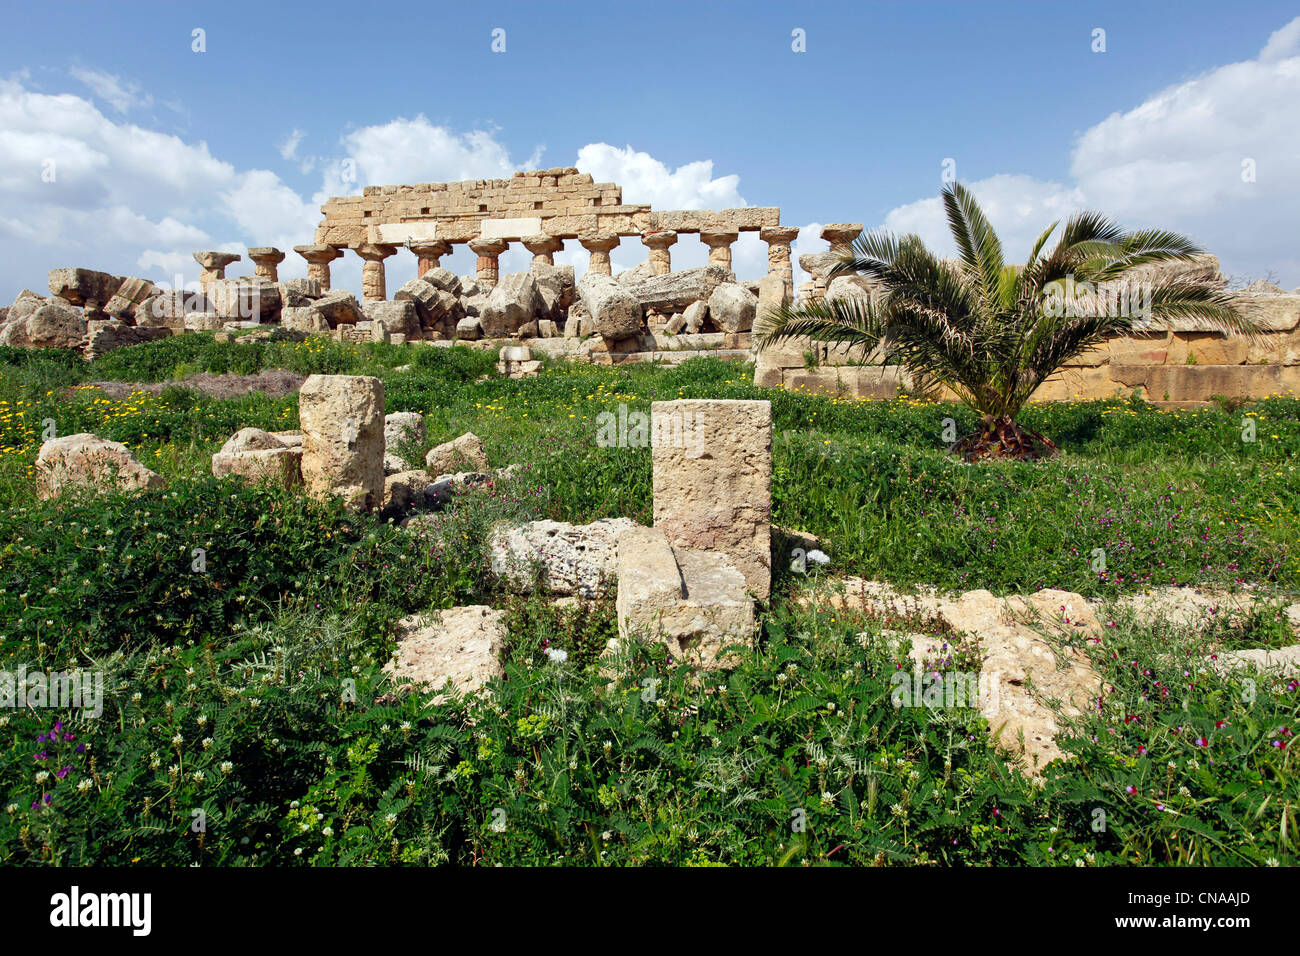 Ruins of Temple C, a Doric Hexastyle building, at Selinunte, Sicily, Italy Stock Photo